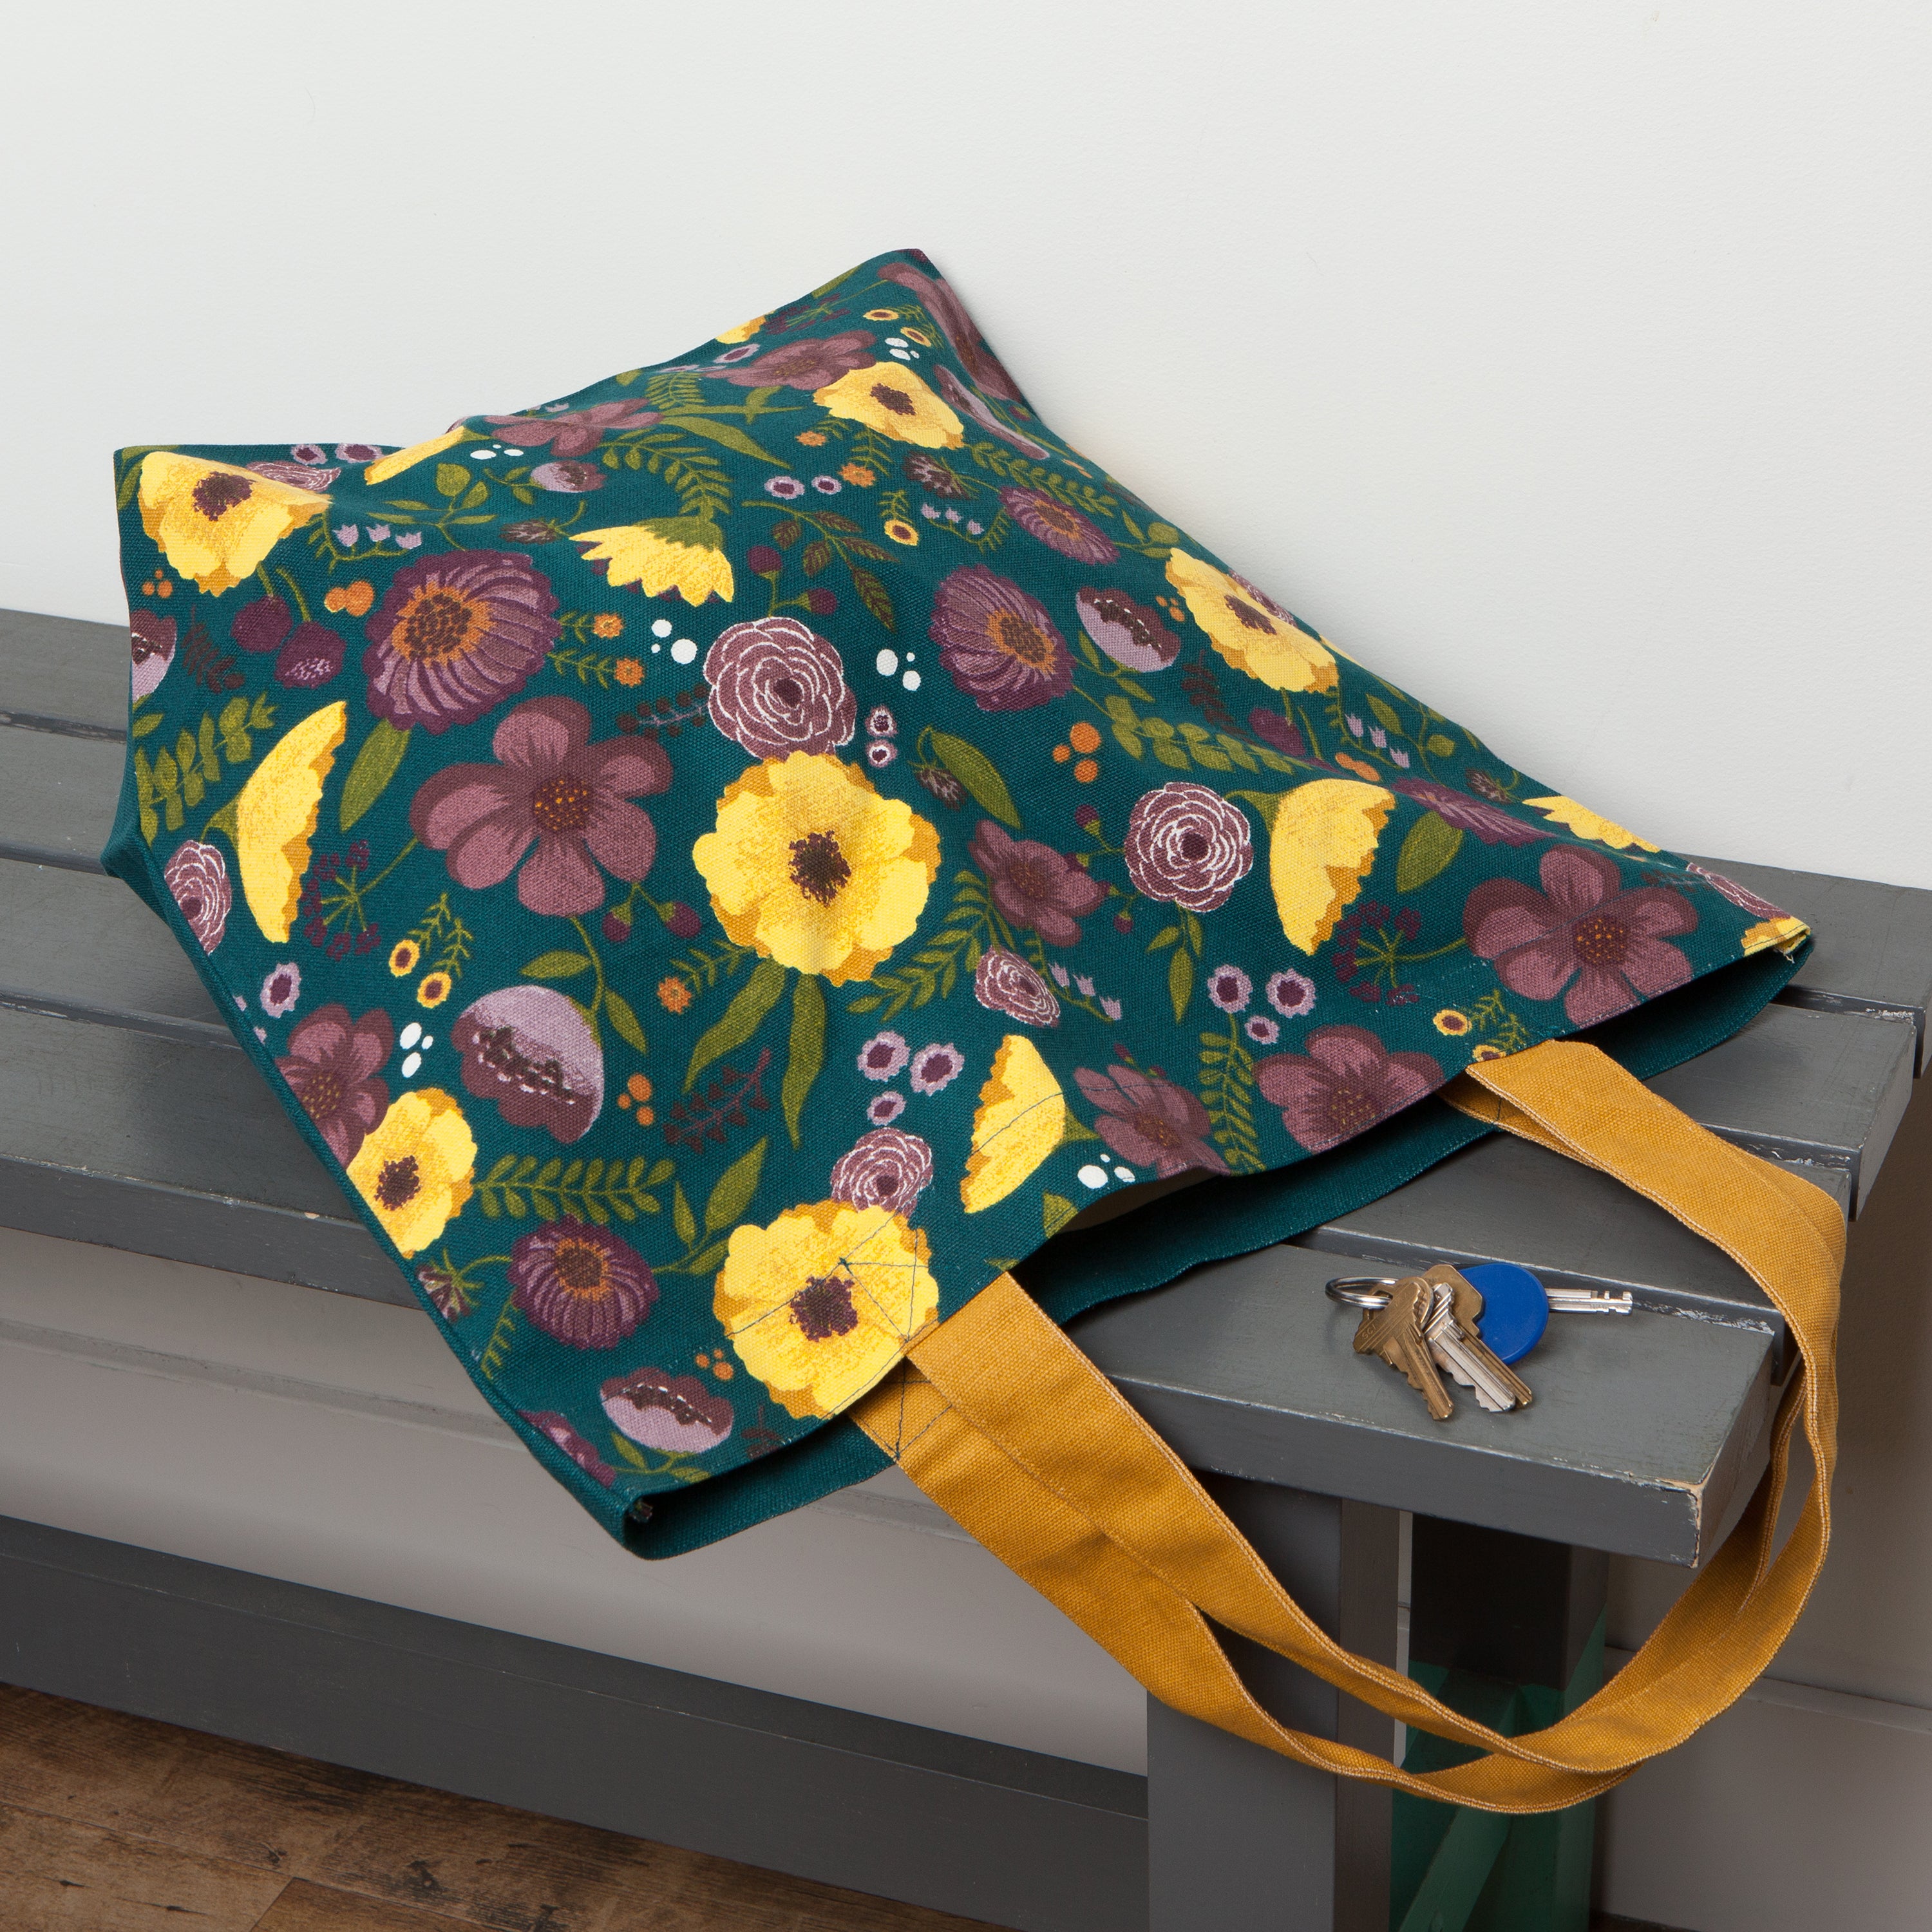 dark green tote bag with yellow handles, yellow and purple flowers with green stems on a grey bench with keys next to it